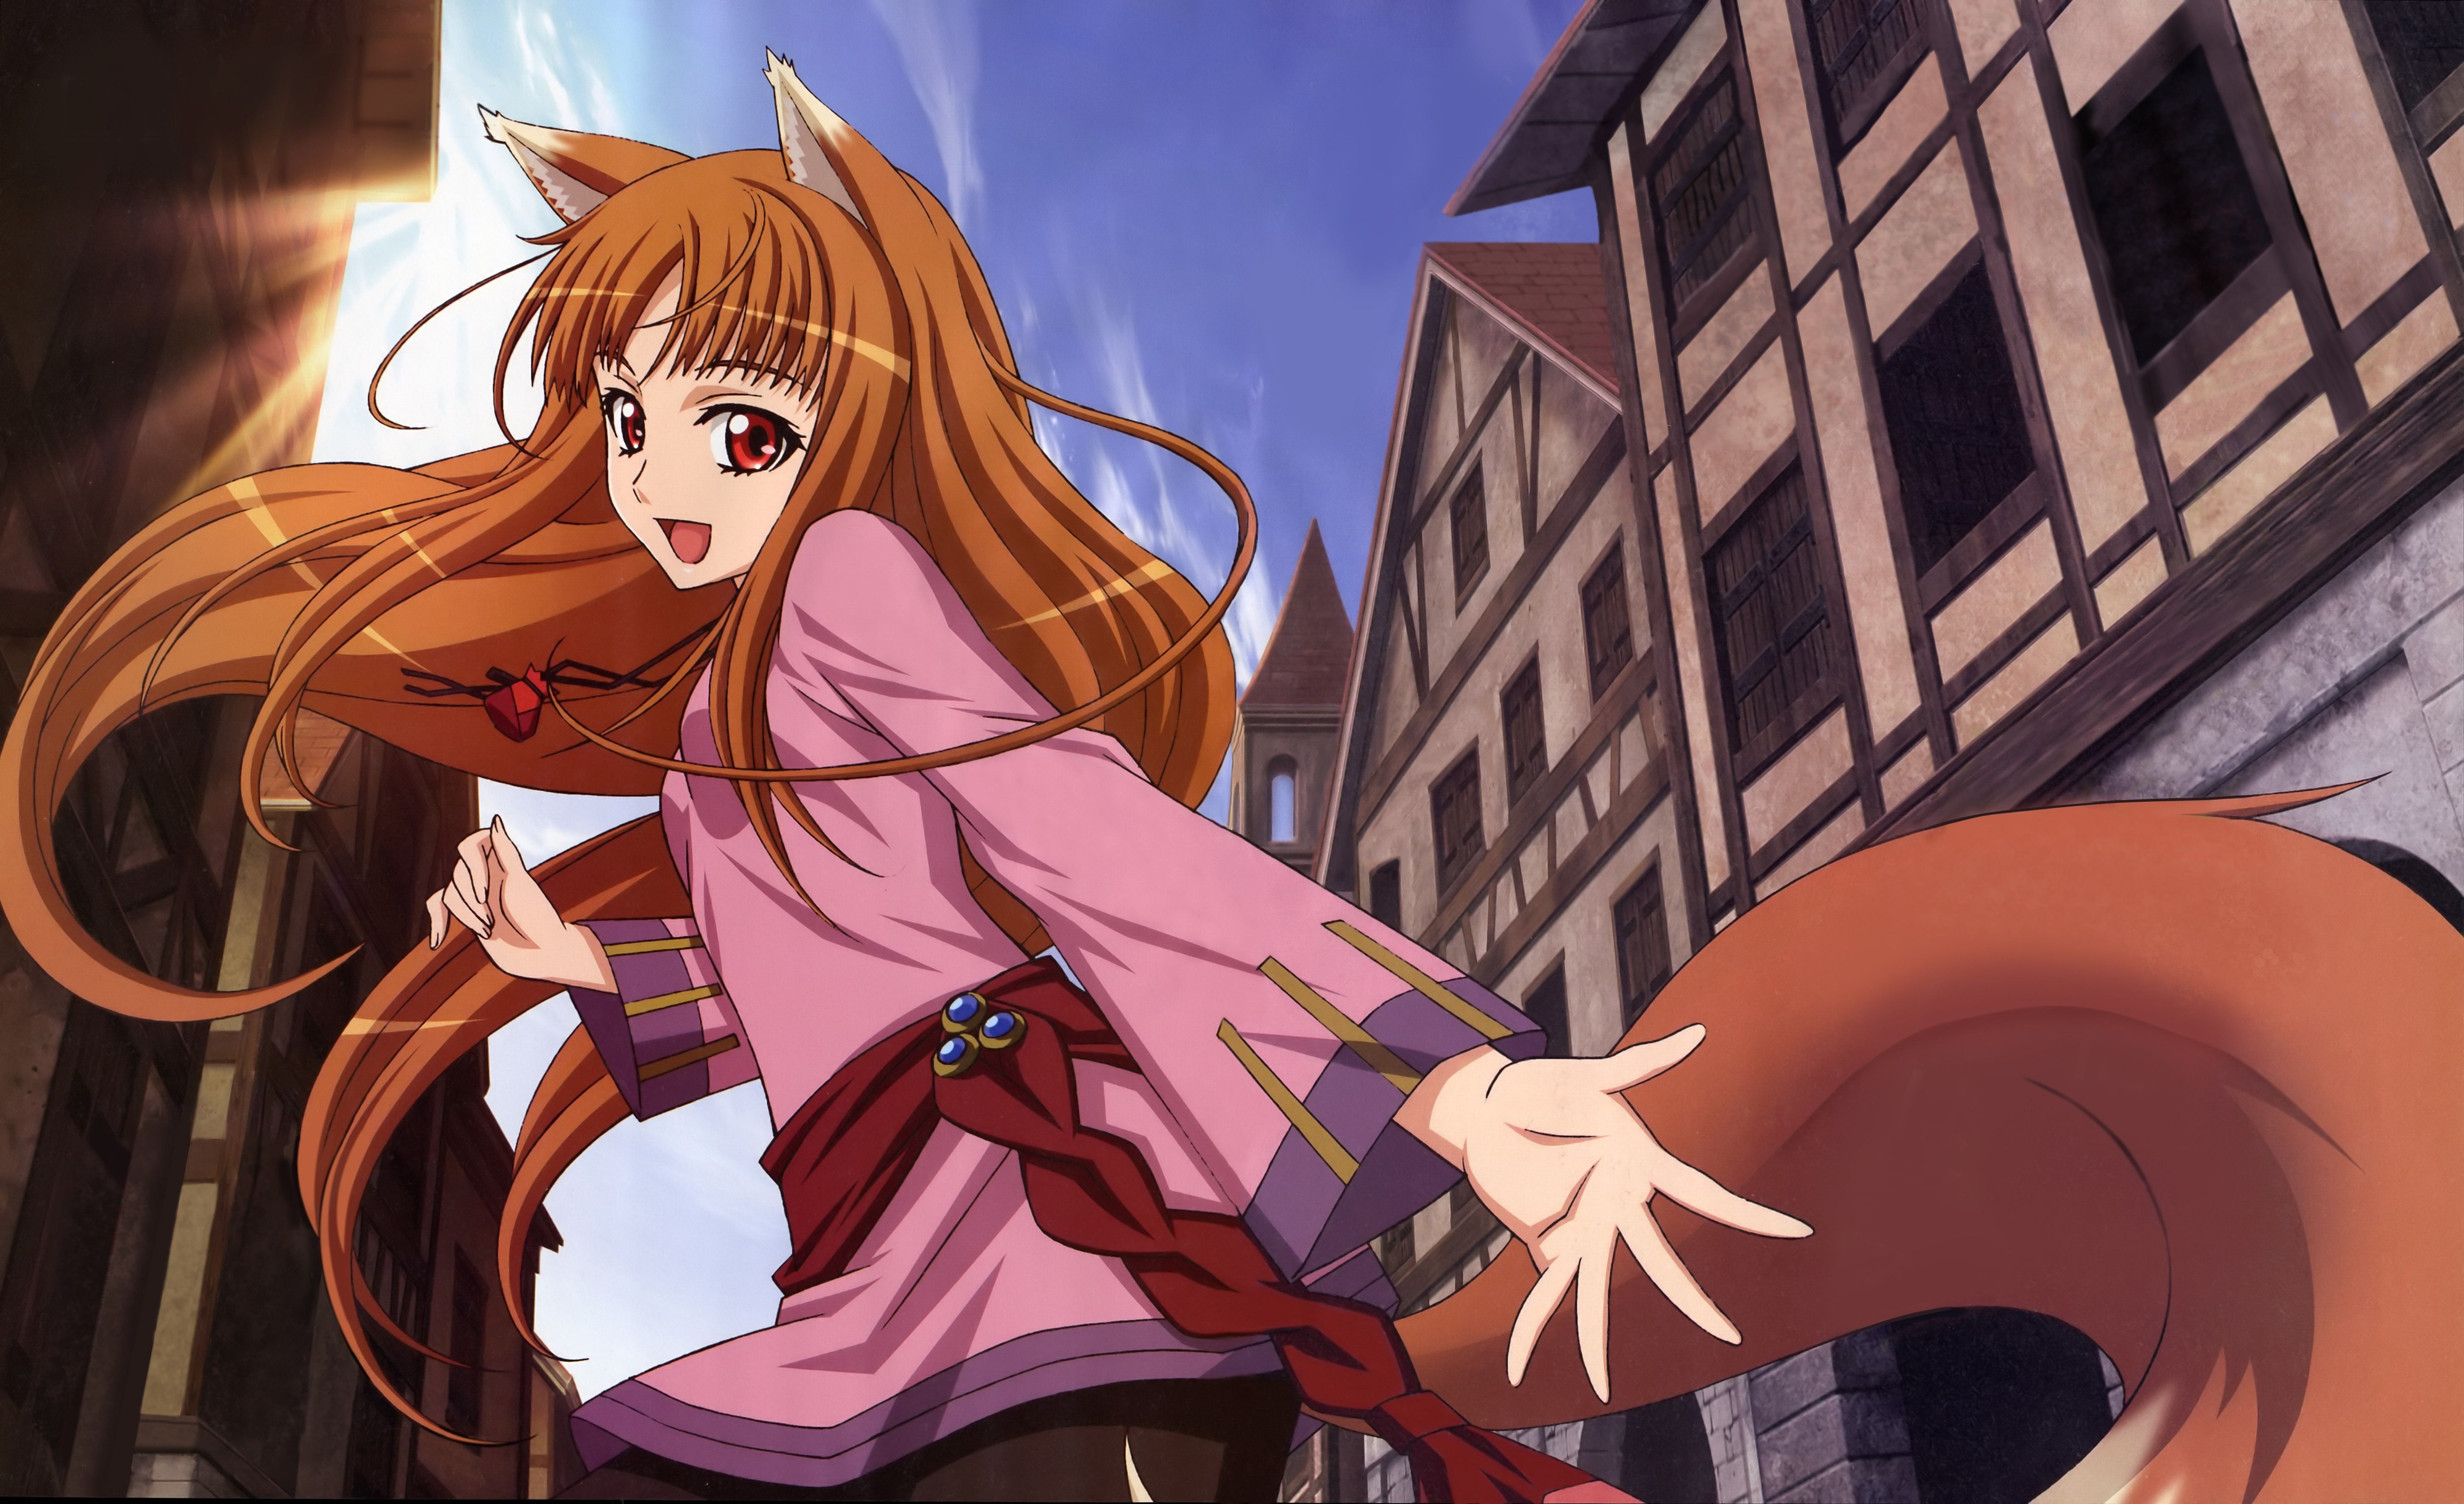 Spice And Wolf Nekomimi Holo The Wise Wolf Wallpaper Spicy And Wolf